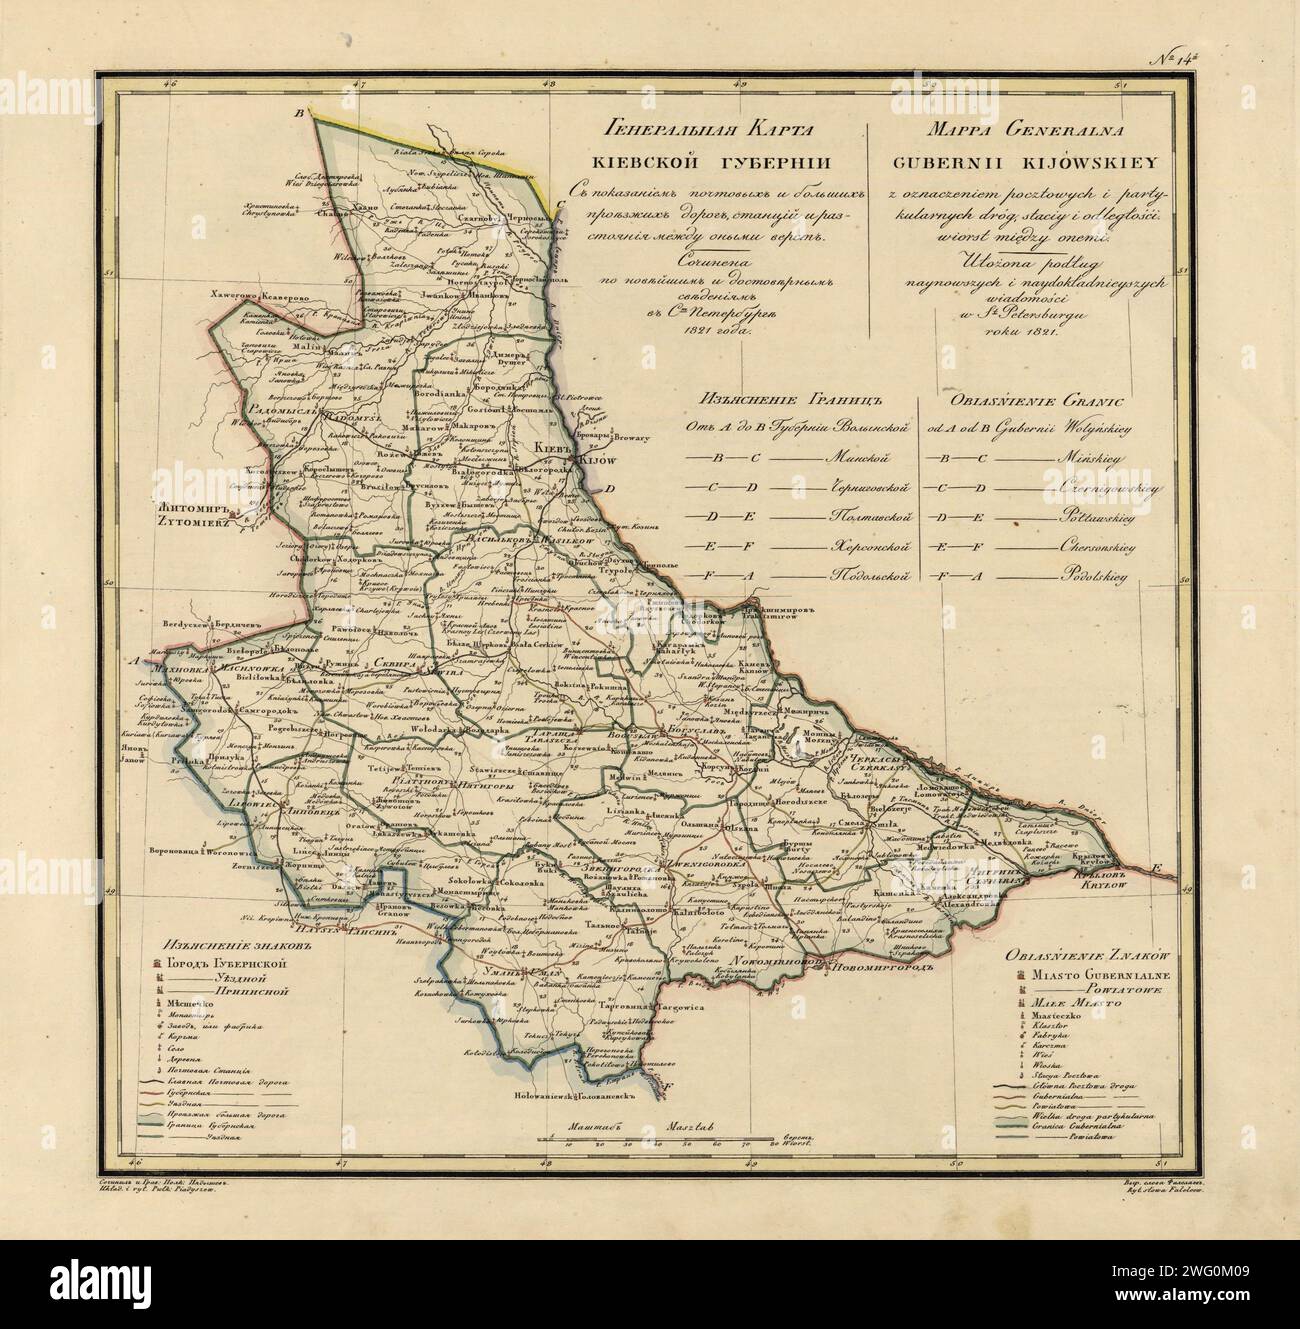 General Map of Kiev Province: Showing Postal and Major Roads, Stations and the Distance in Versts between Them, 1821. This 1821 map of Kiev Province is from a larger work,Geograficheskii atlas Rossiiskoi imperii, tsarstva Pol'skogo i velikogo kniazhestva Finliandskogo (Geographical atlas of the Russian Empire, the Kingdom of Poland, and the Grand Duchy of Finland), containing 60 maps of the Russian Empire. Compiled and engraved by Colonel V.P. Piadyshev, it reflects the detailed mapping carried out by Russian military cartographers in the first quarter of the 19th century. The map shows popula Stock Photo